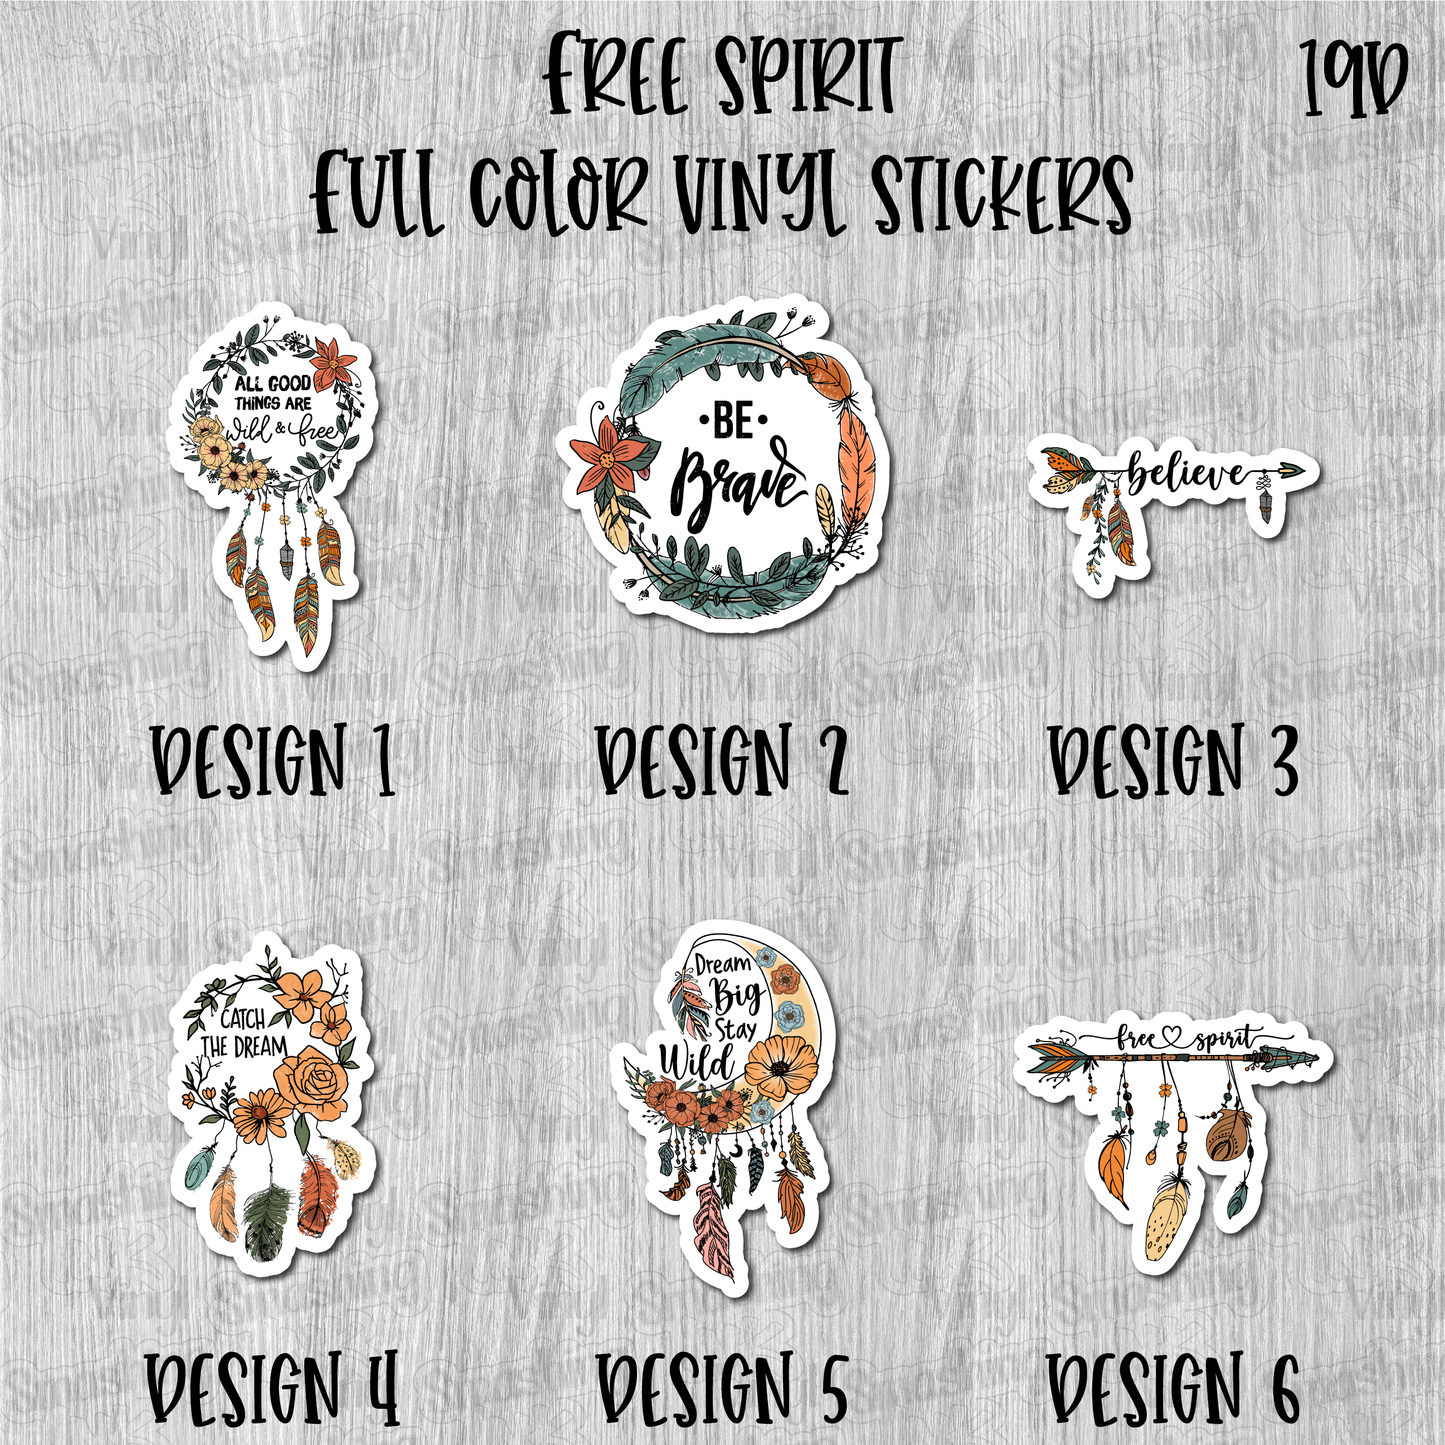 Free Spirit - Full Color Vinyl Stickers (SHIPS IN 3-7 BUS DAYS)